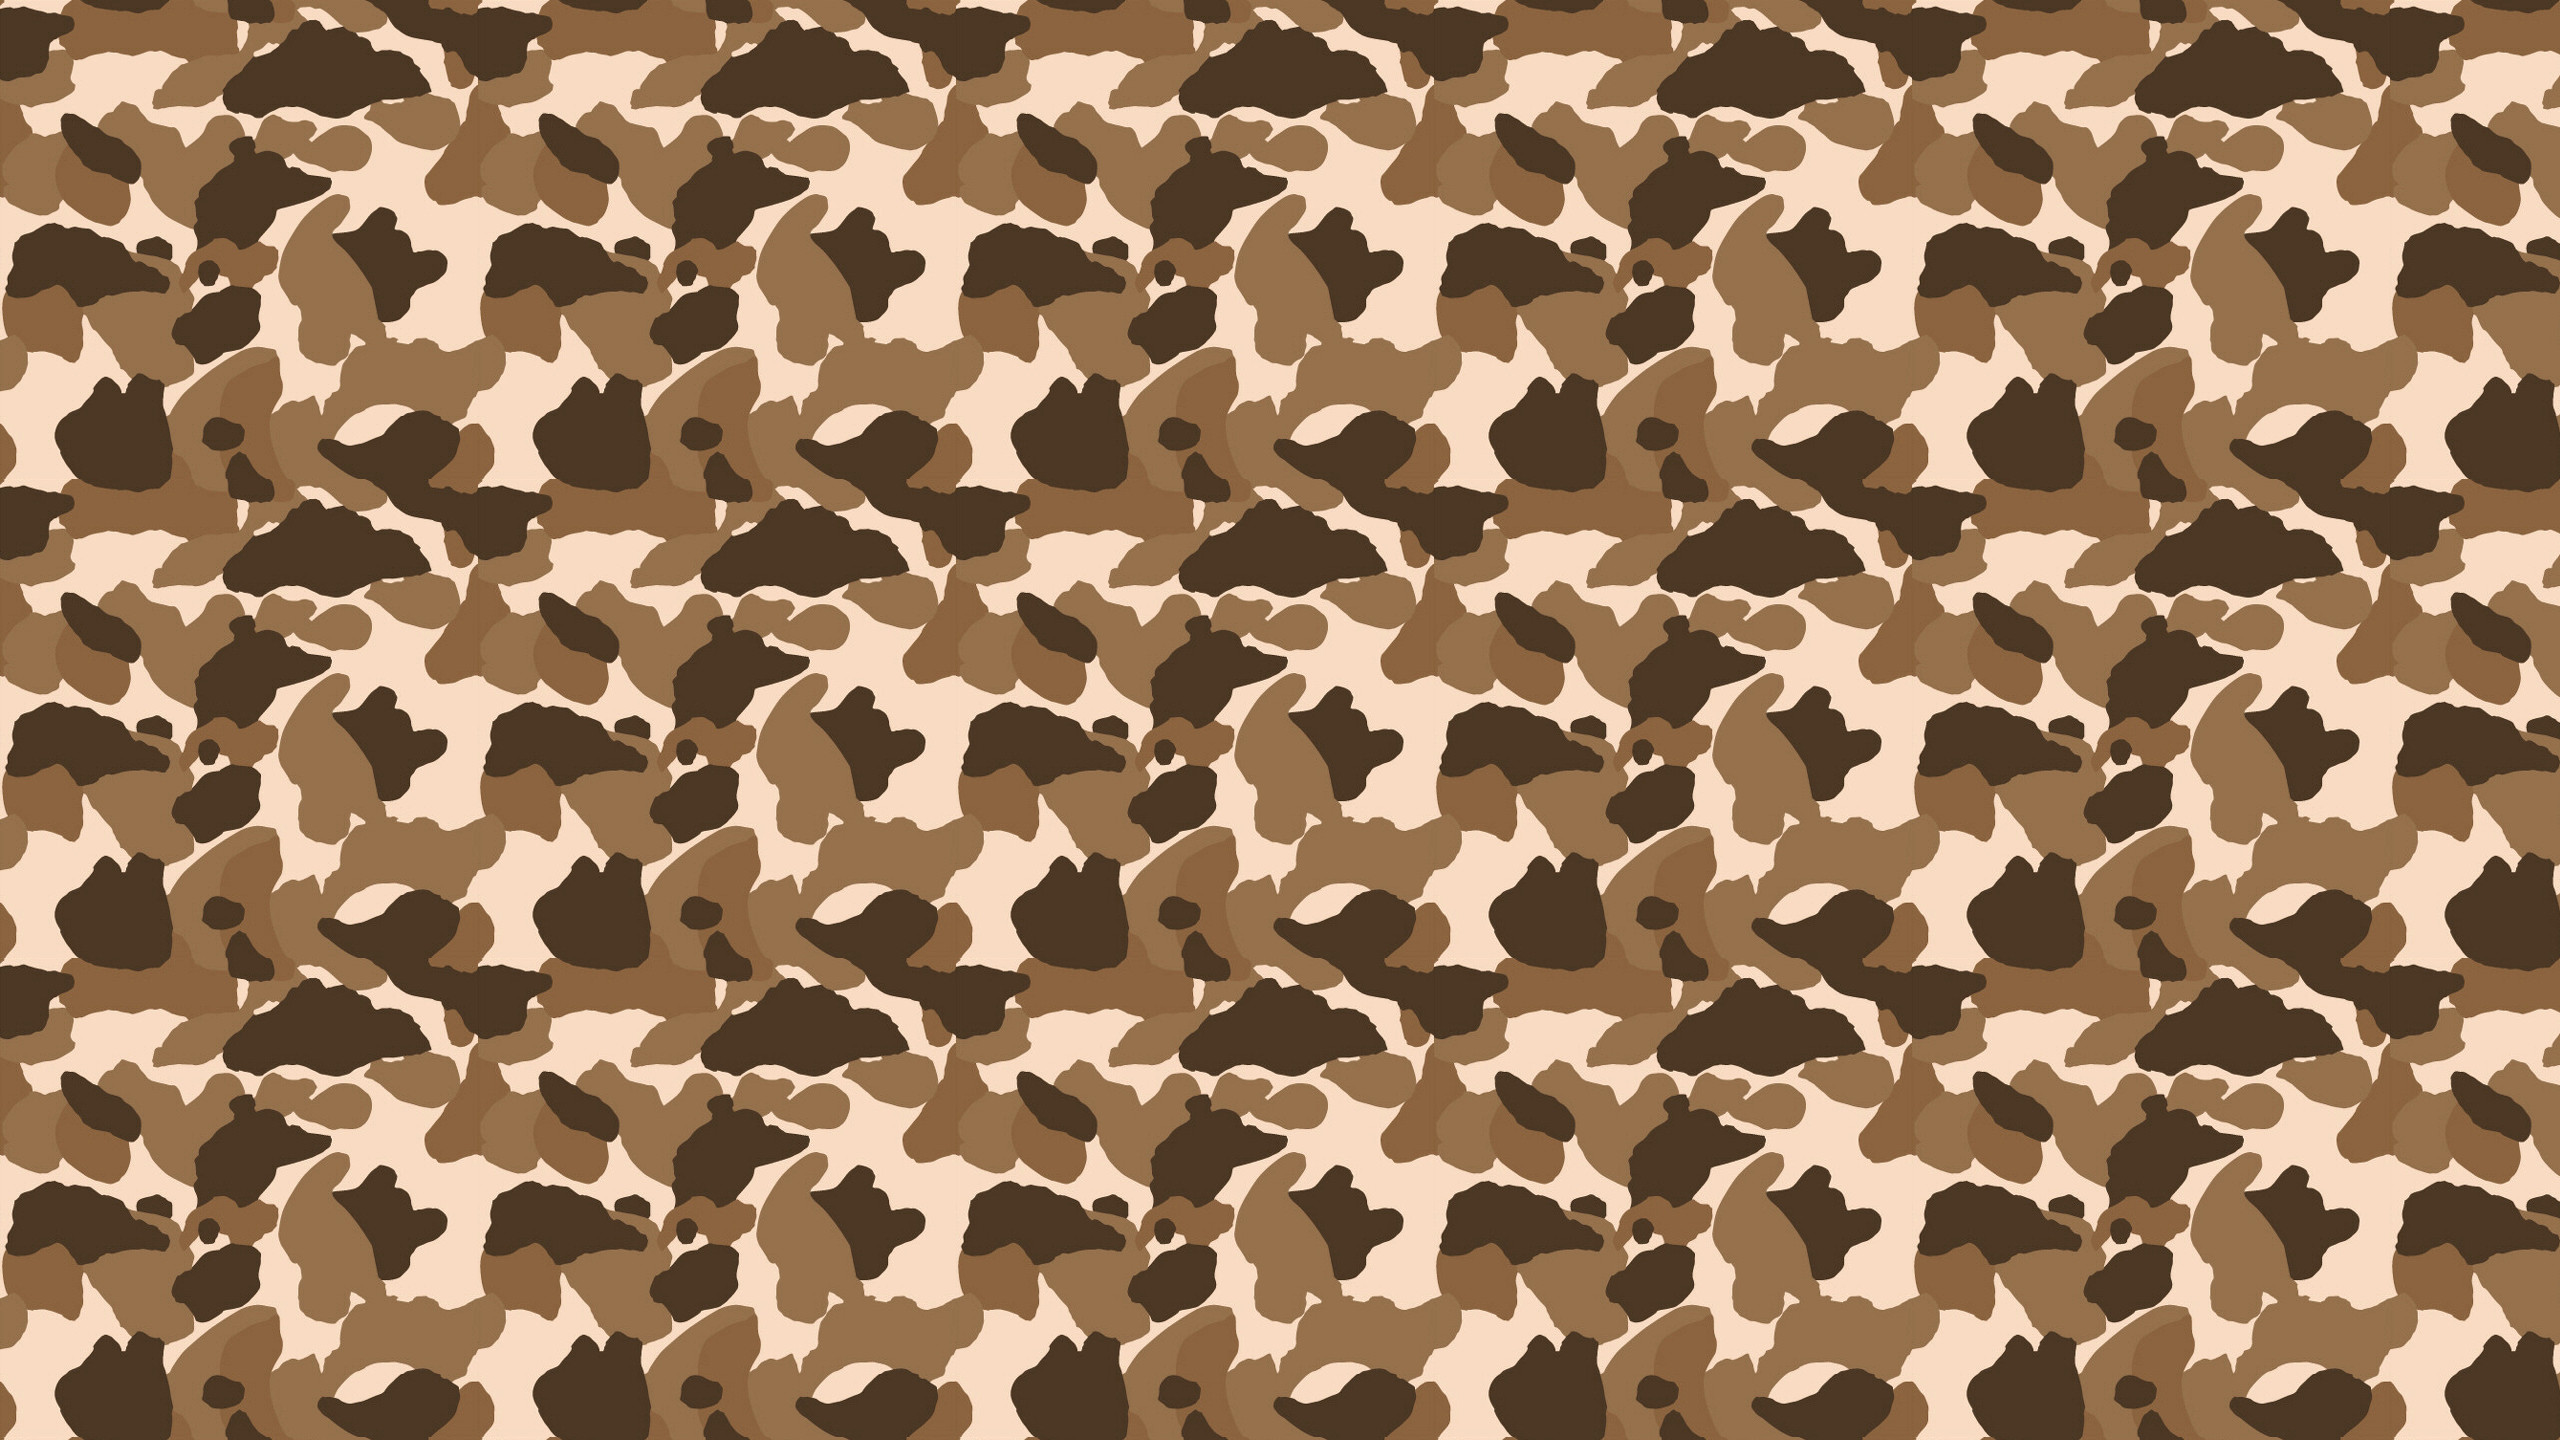 2560x1440 this Brown Camo Desktop Wallpaper is easy. Just save the wallpaper .